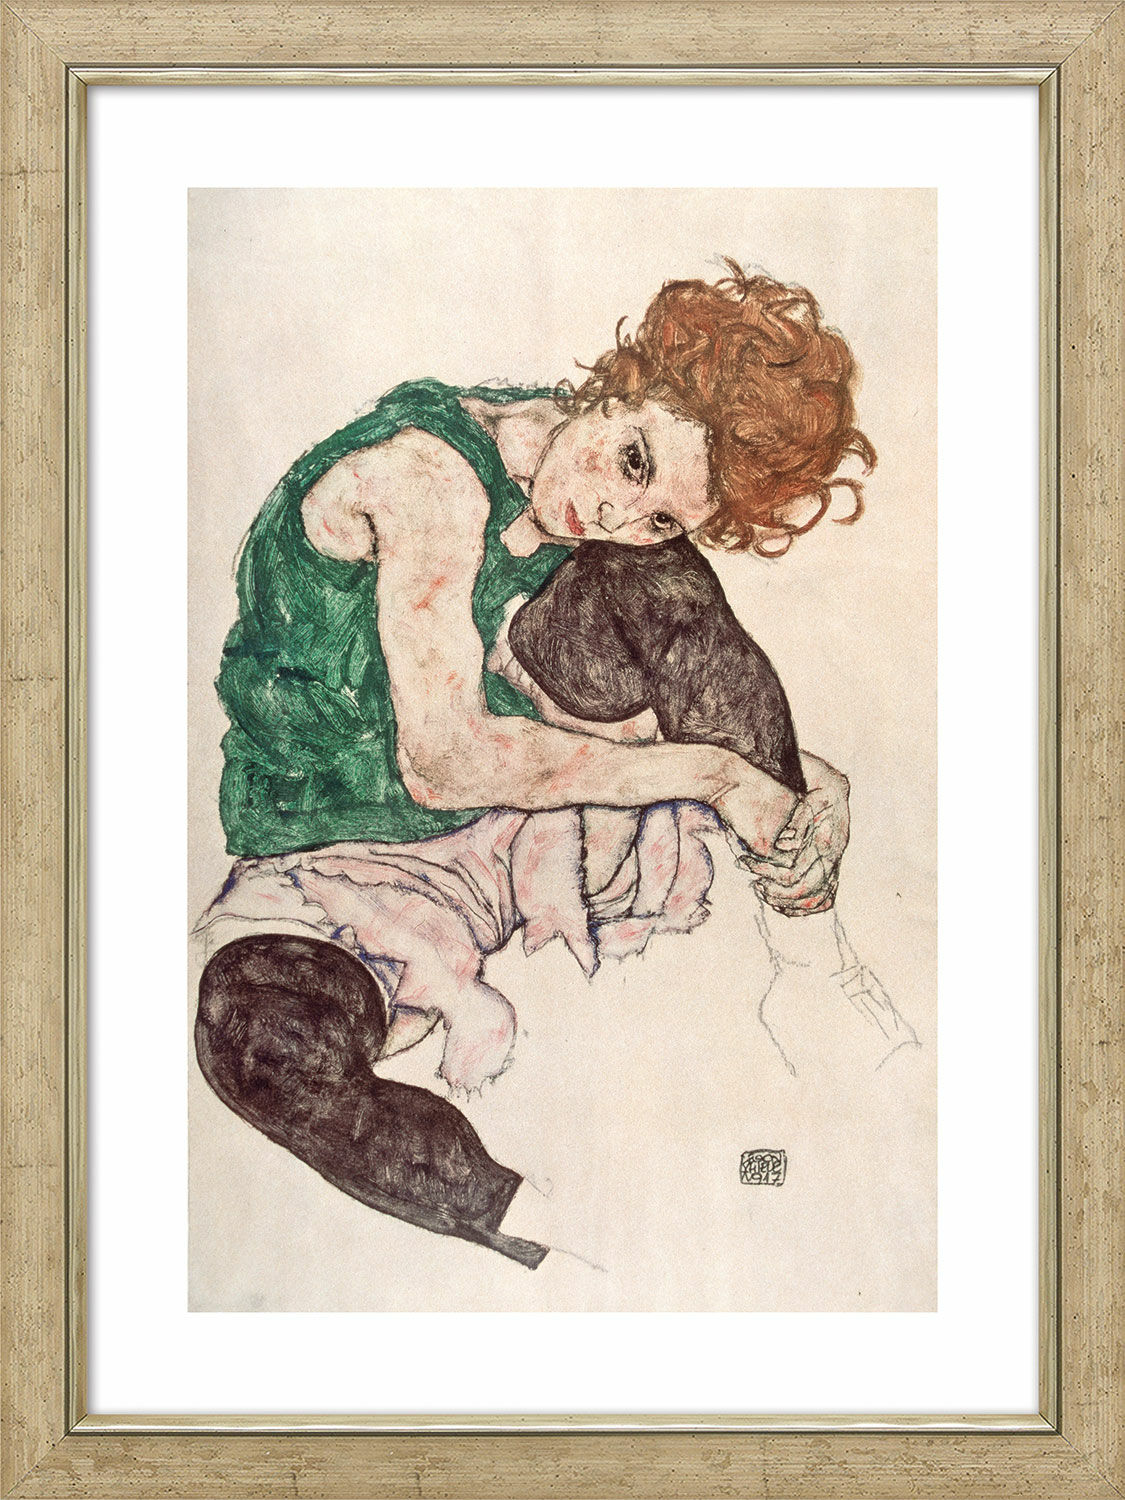 Picture "Seated Woman with Raised Knee" (1917), framed by Egon Schiele